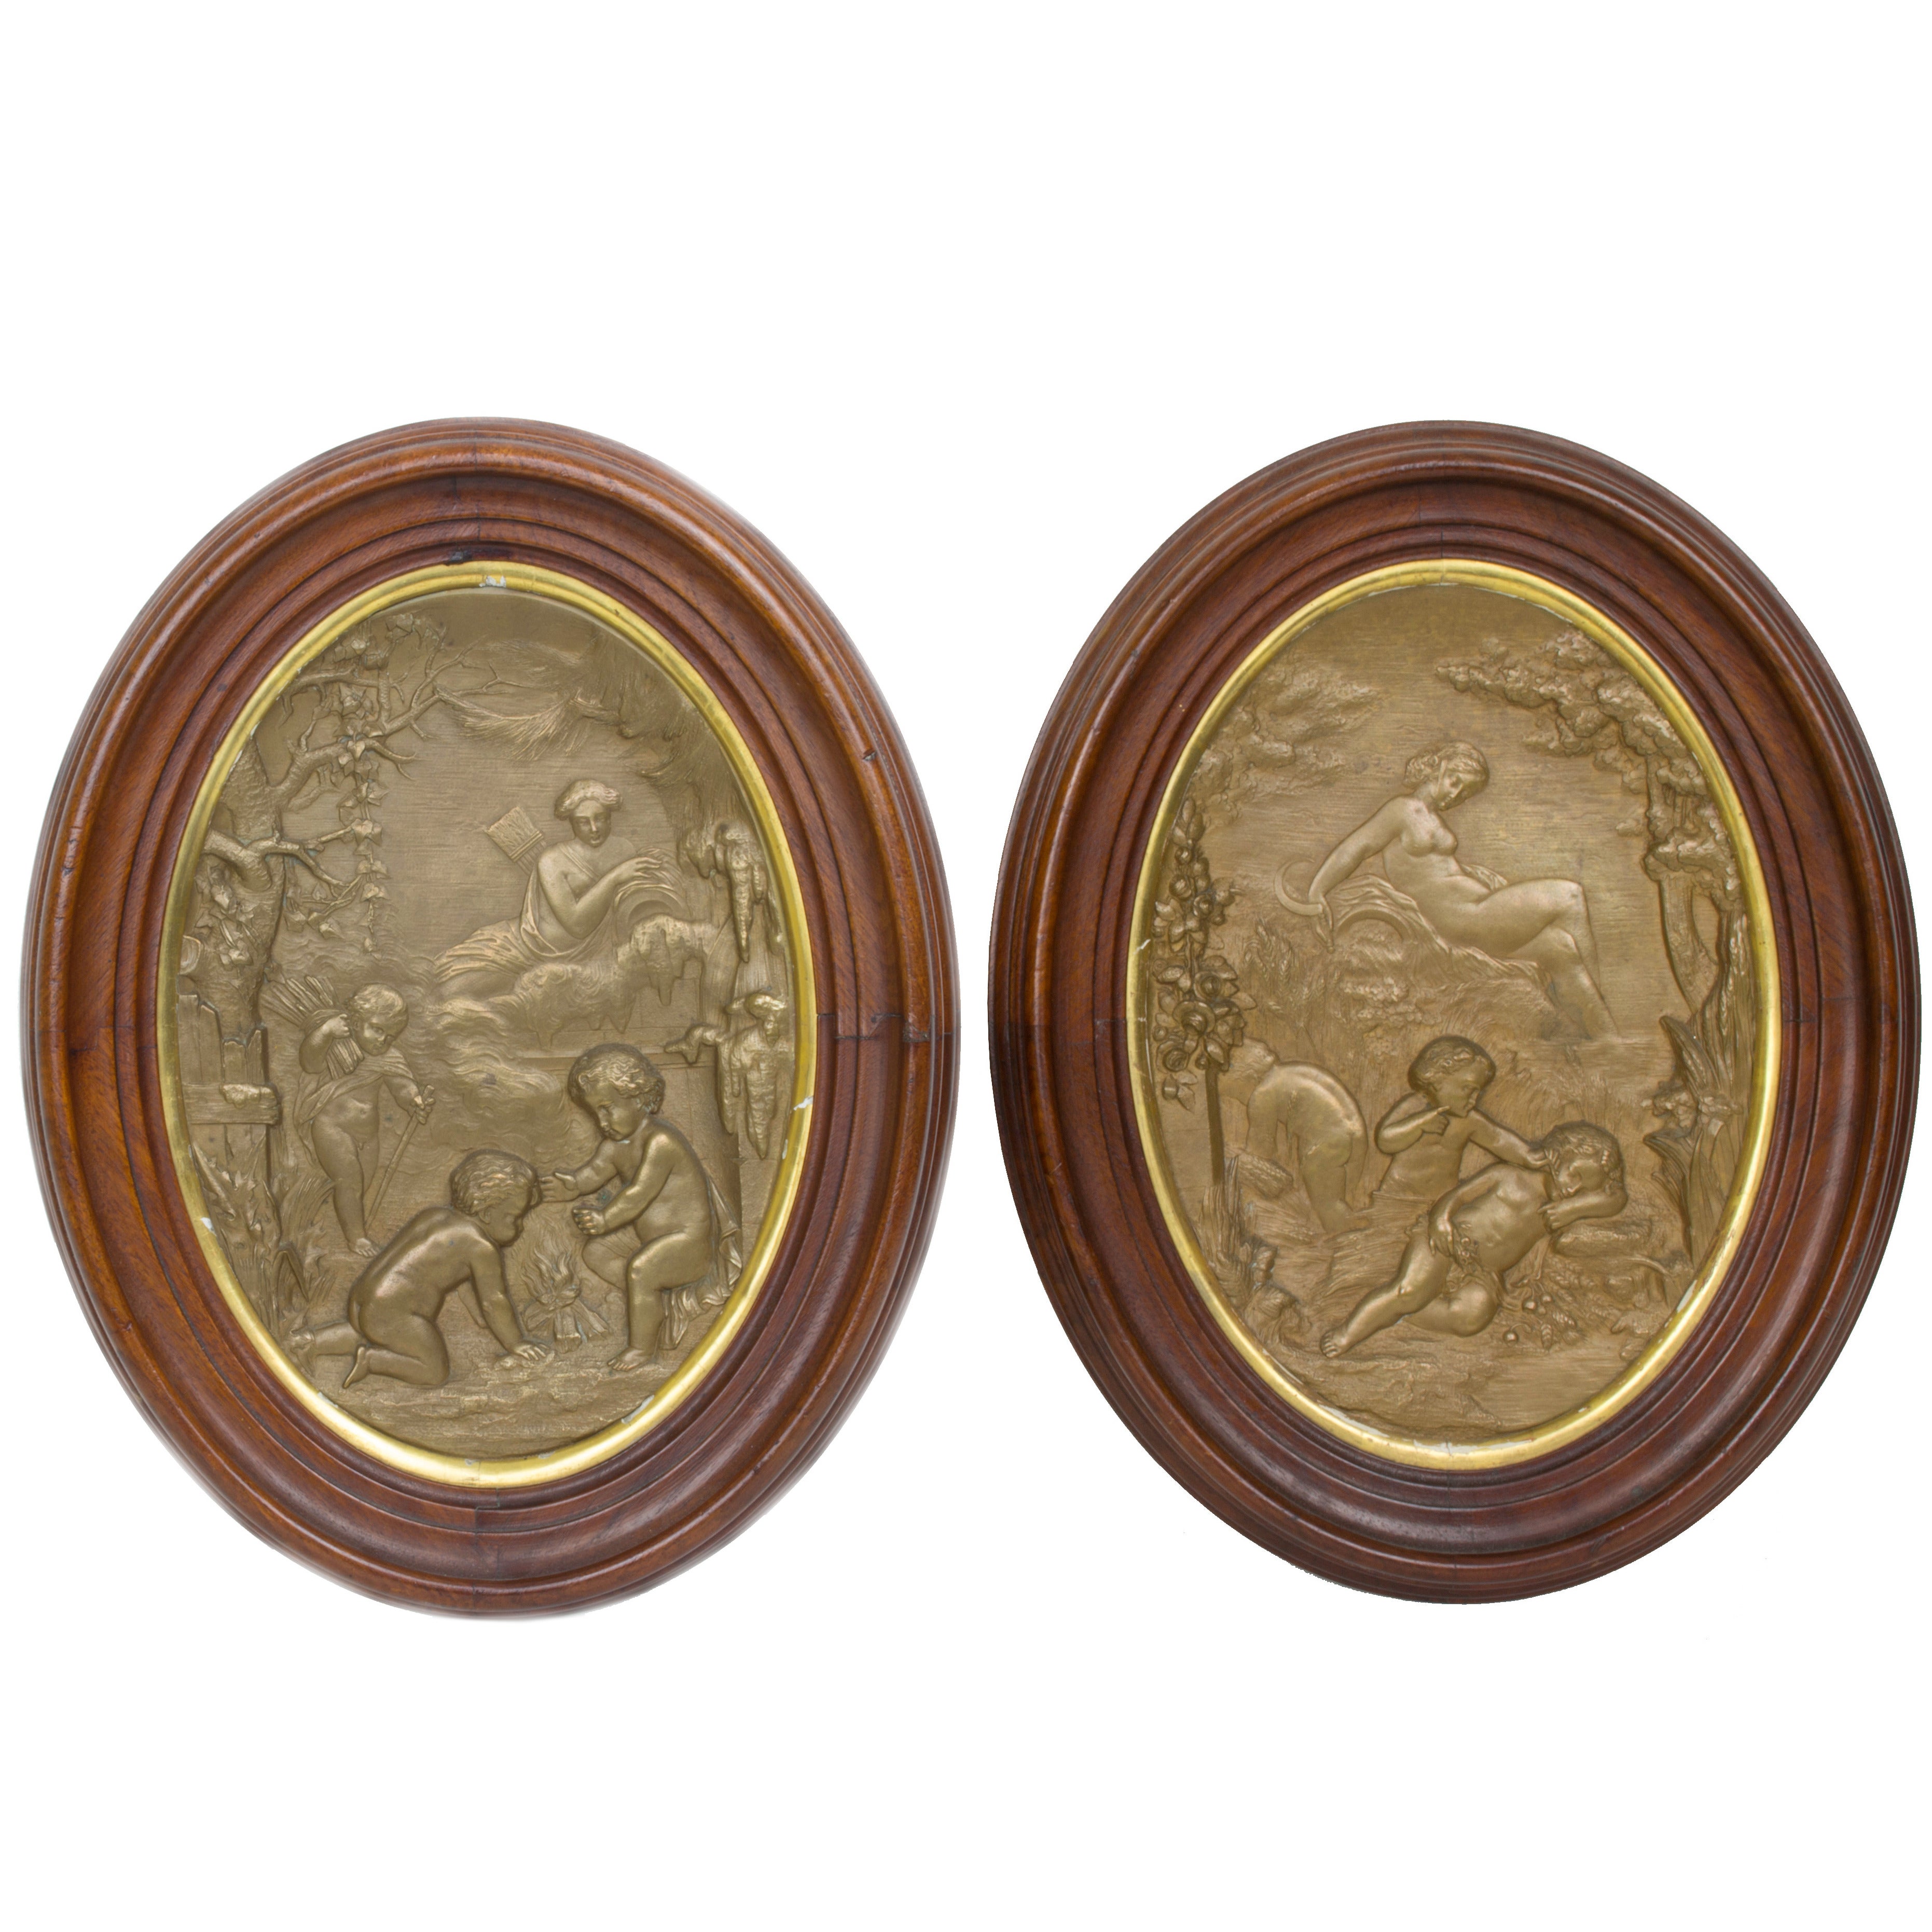 Pair of Oval Patinated Metal Wall Plaques with Cherub Decorations